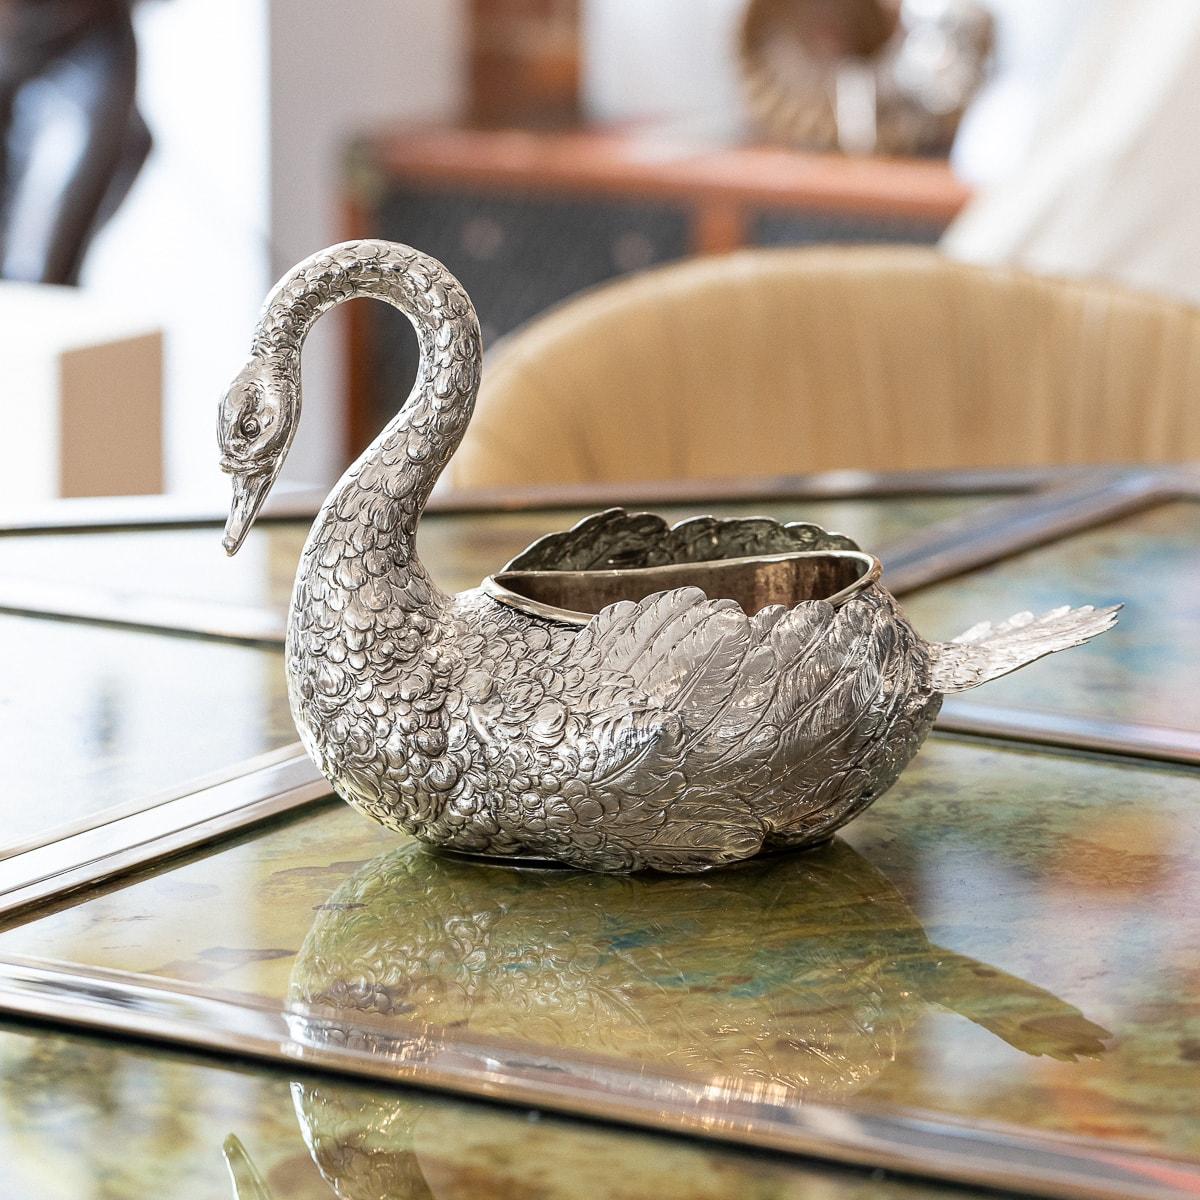 Antique late-19th Century German solid silver jardiniere, swan shaped, applied with a pair of hindged wings. The sides are chased with a feathers in relief, Inside fitted with a brass liner. Hallmarked German silver (800 standard), crowned R